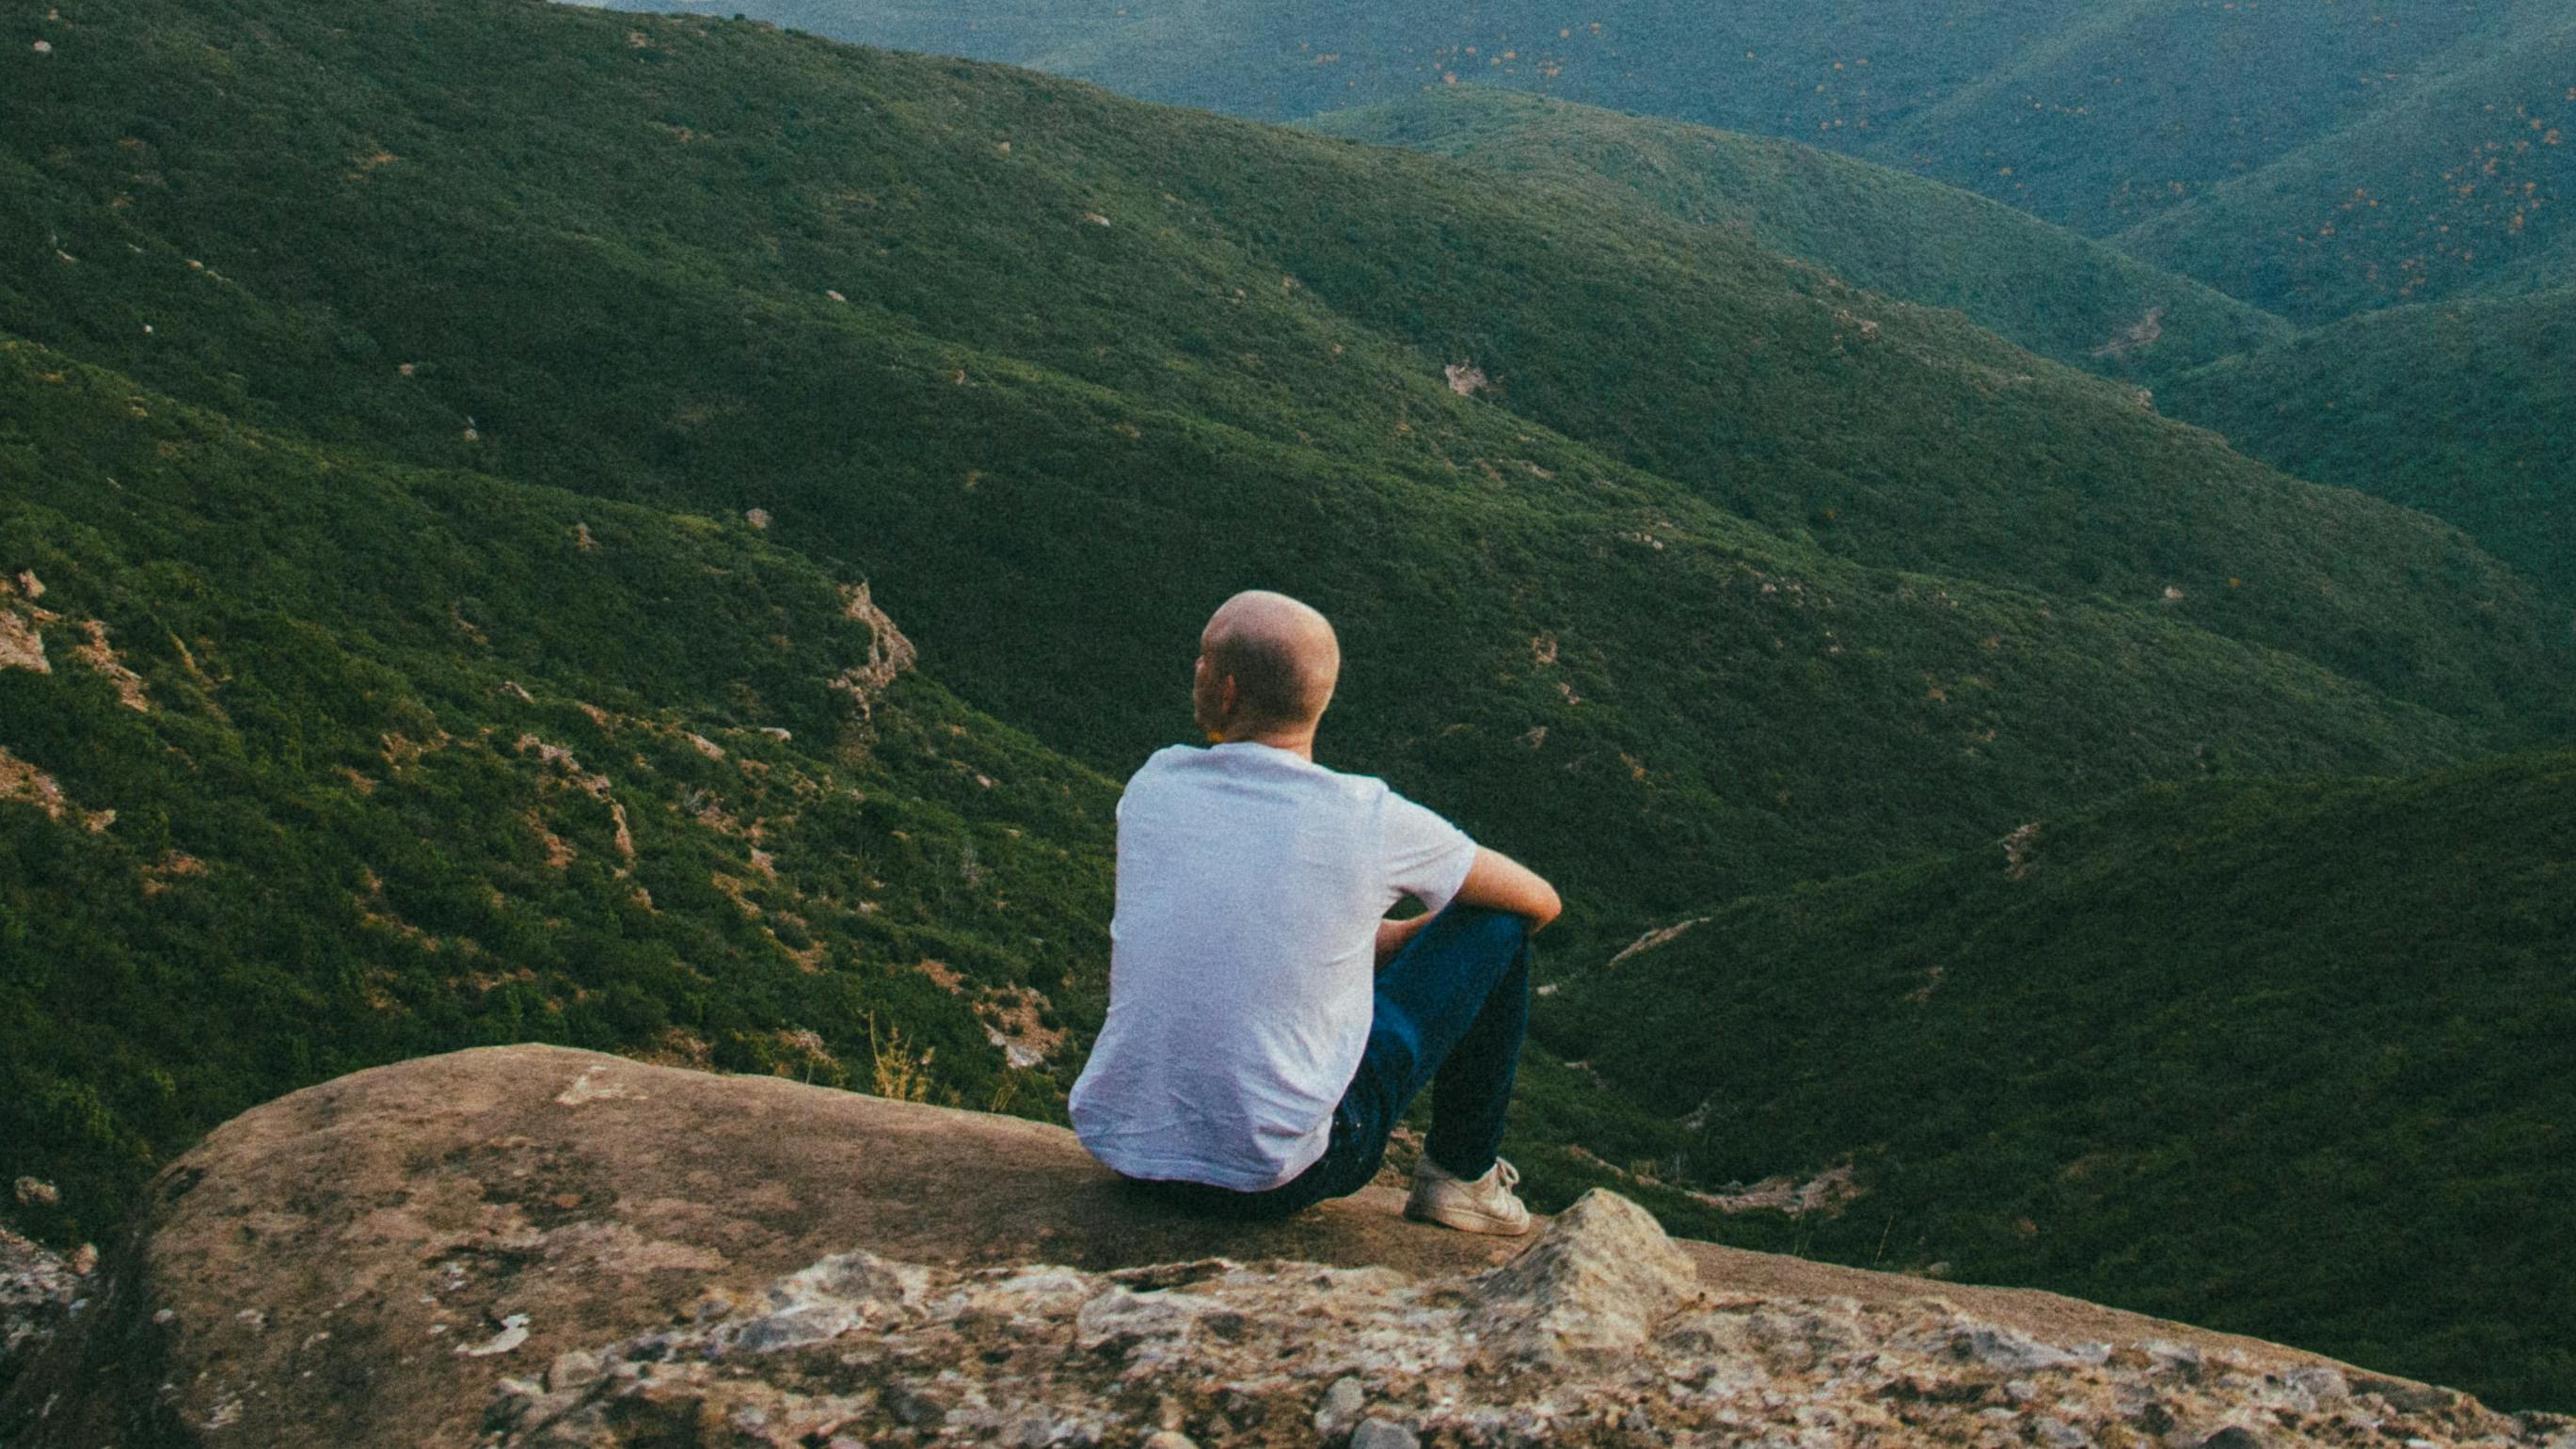 A man sitting on a rock looking out at the green valley below